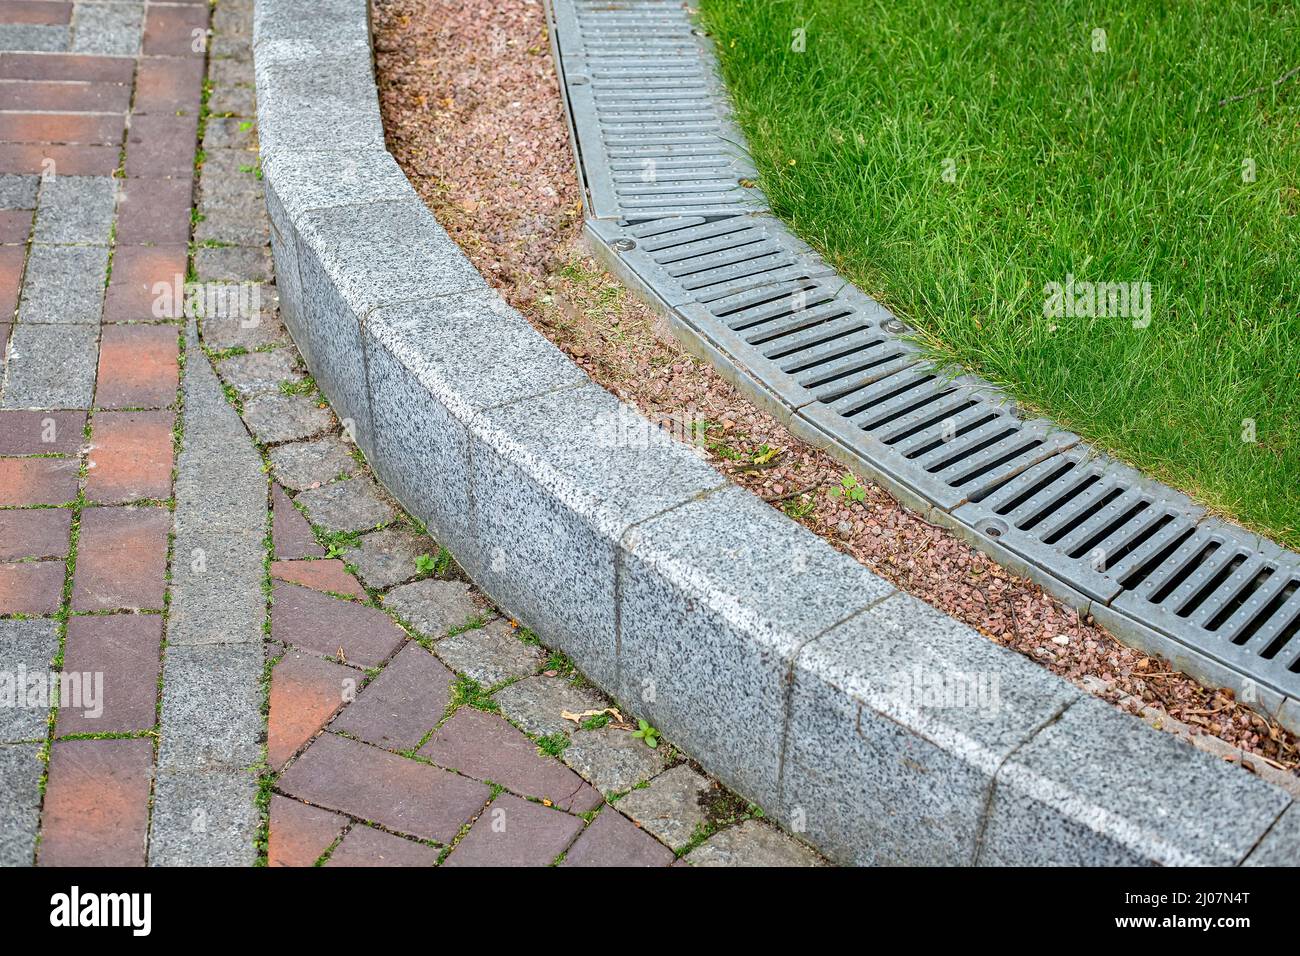 iron drainage grate on the walkway side with green turf lawn and stone pebbles at the granite curb along the pedestrian pavement of stone brick tiles, Stock Photo